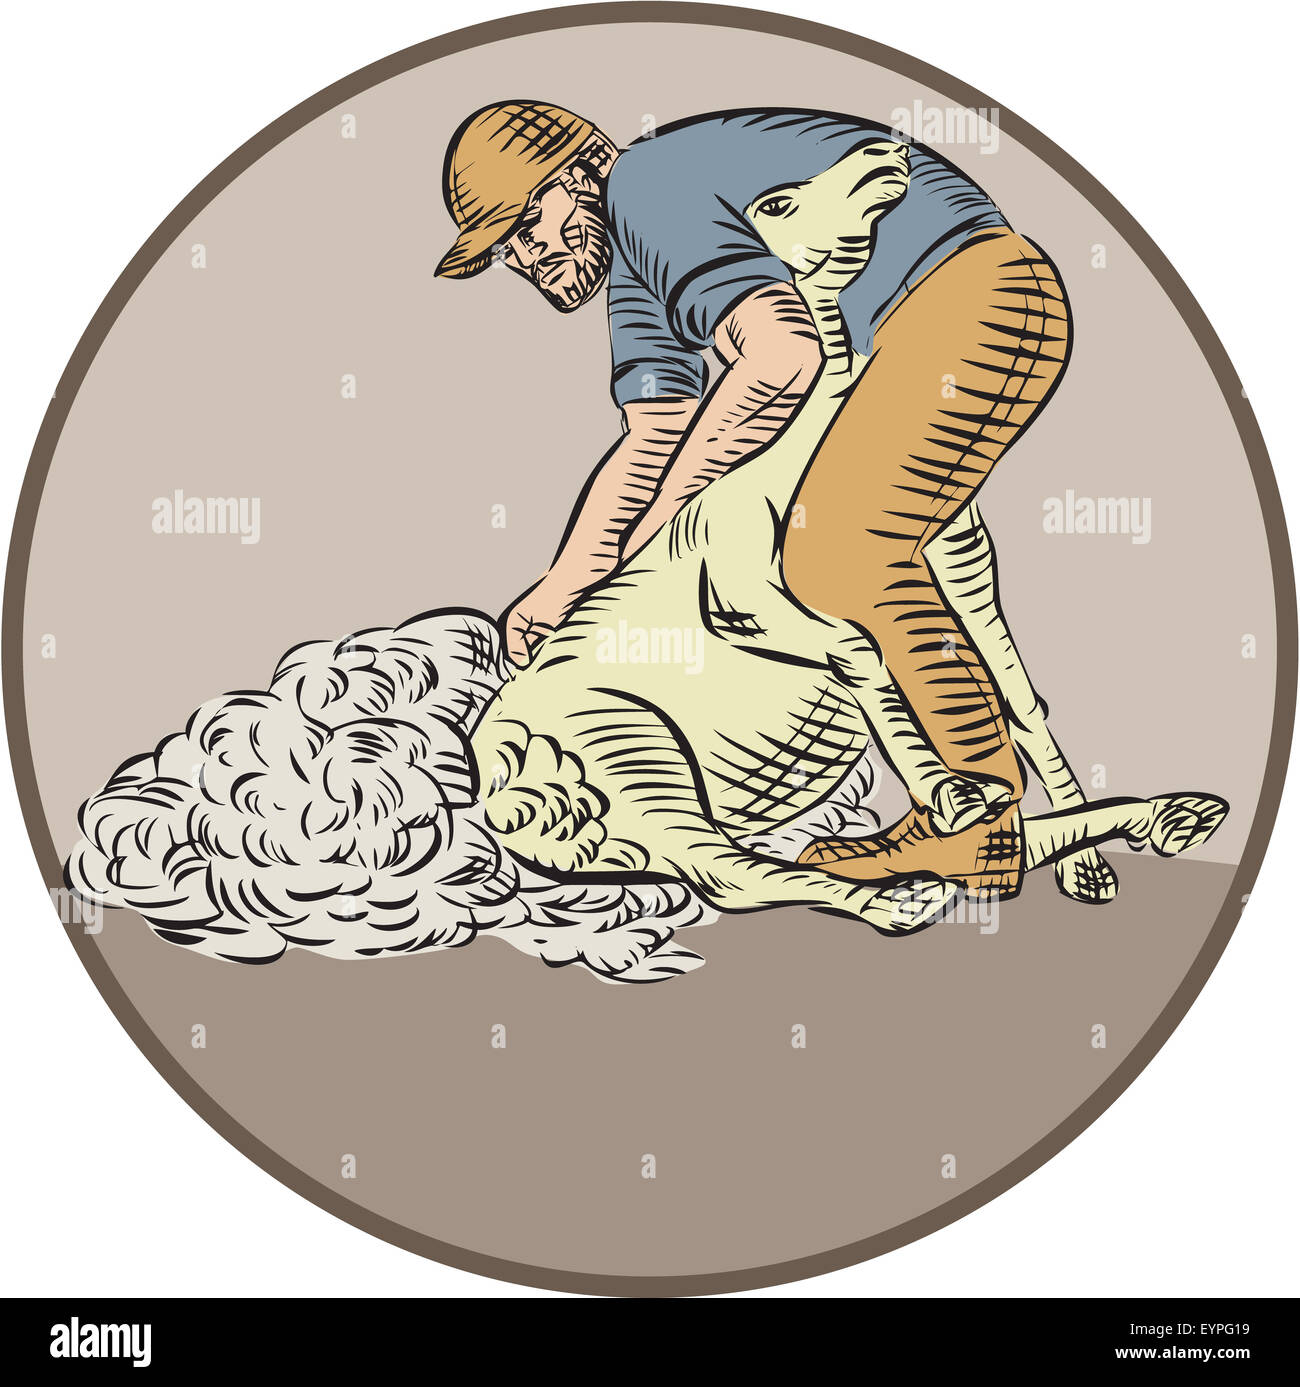 Etching engraving handmade style illustration of a farmworker, farmer, farmhand using shears shearing wool from sheep set inside circle on isolated background. Stock Photo